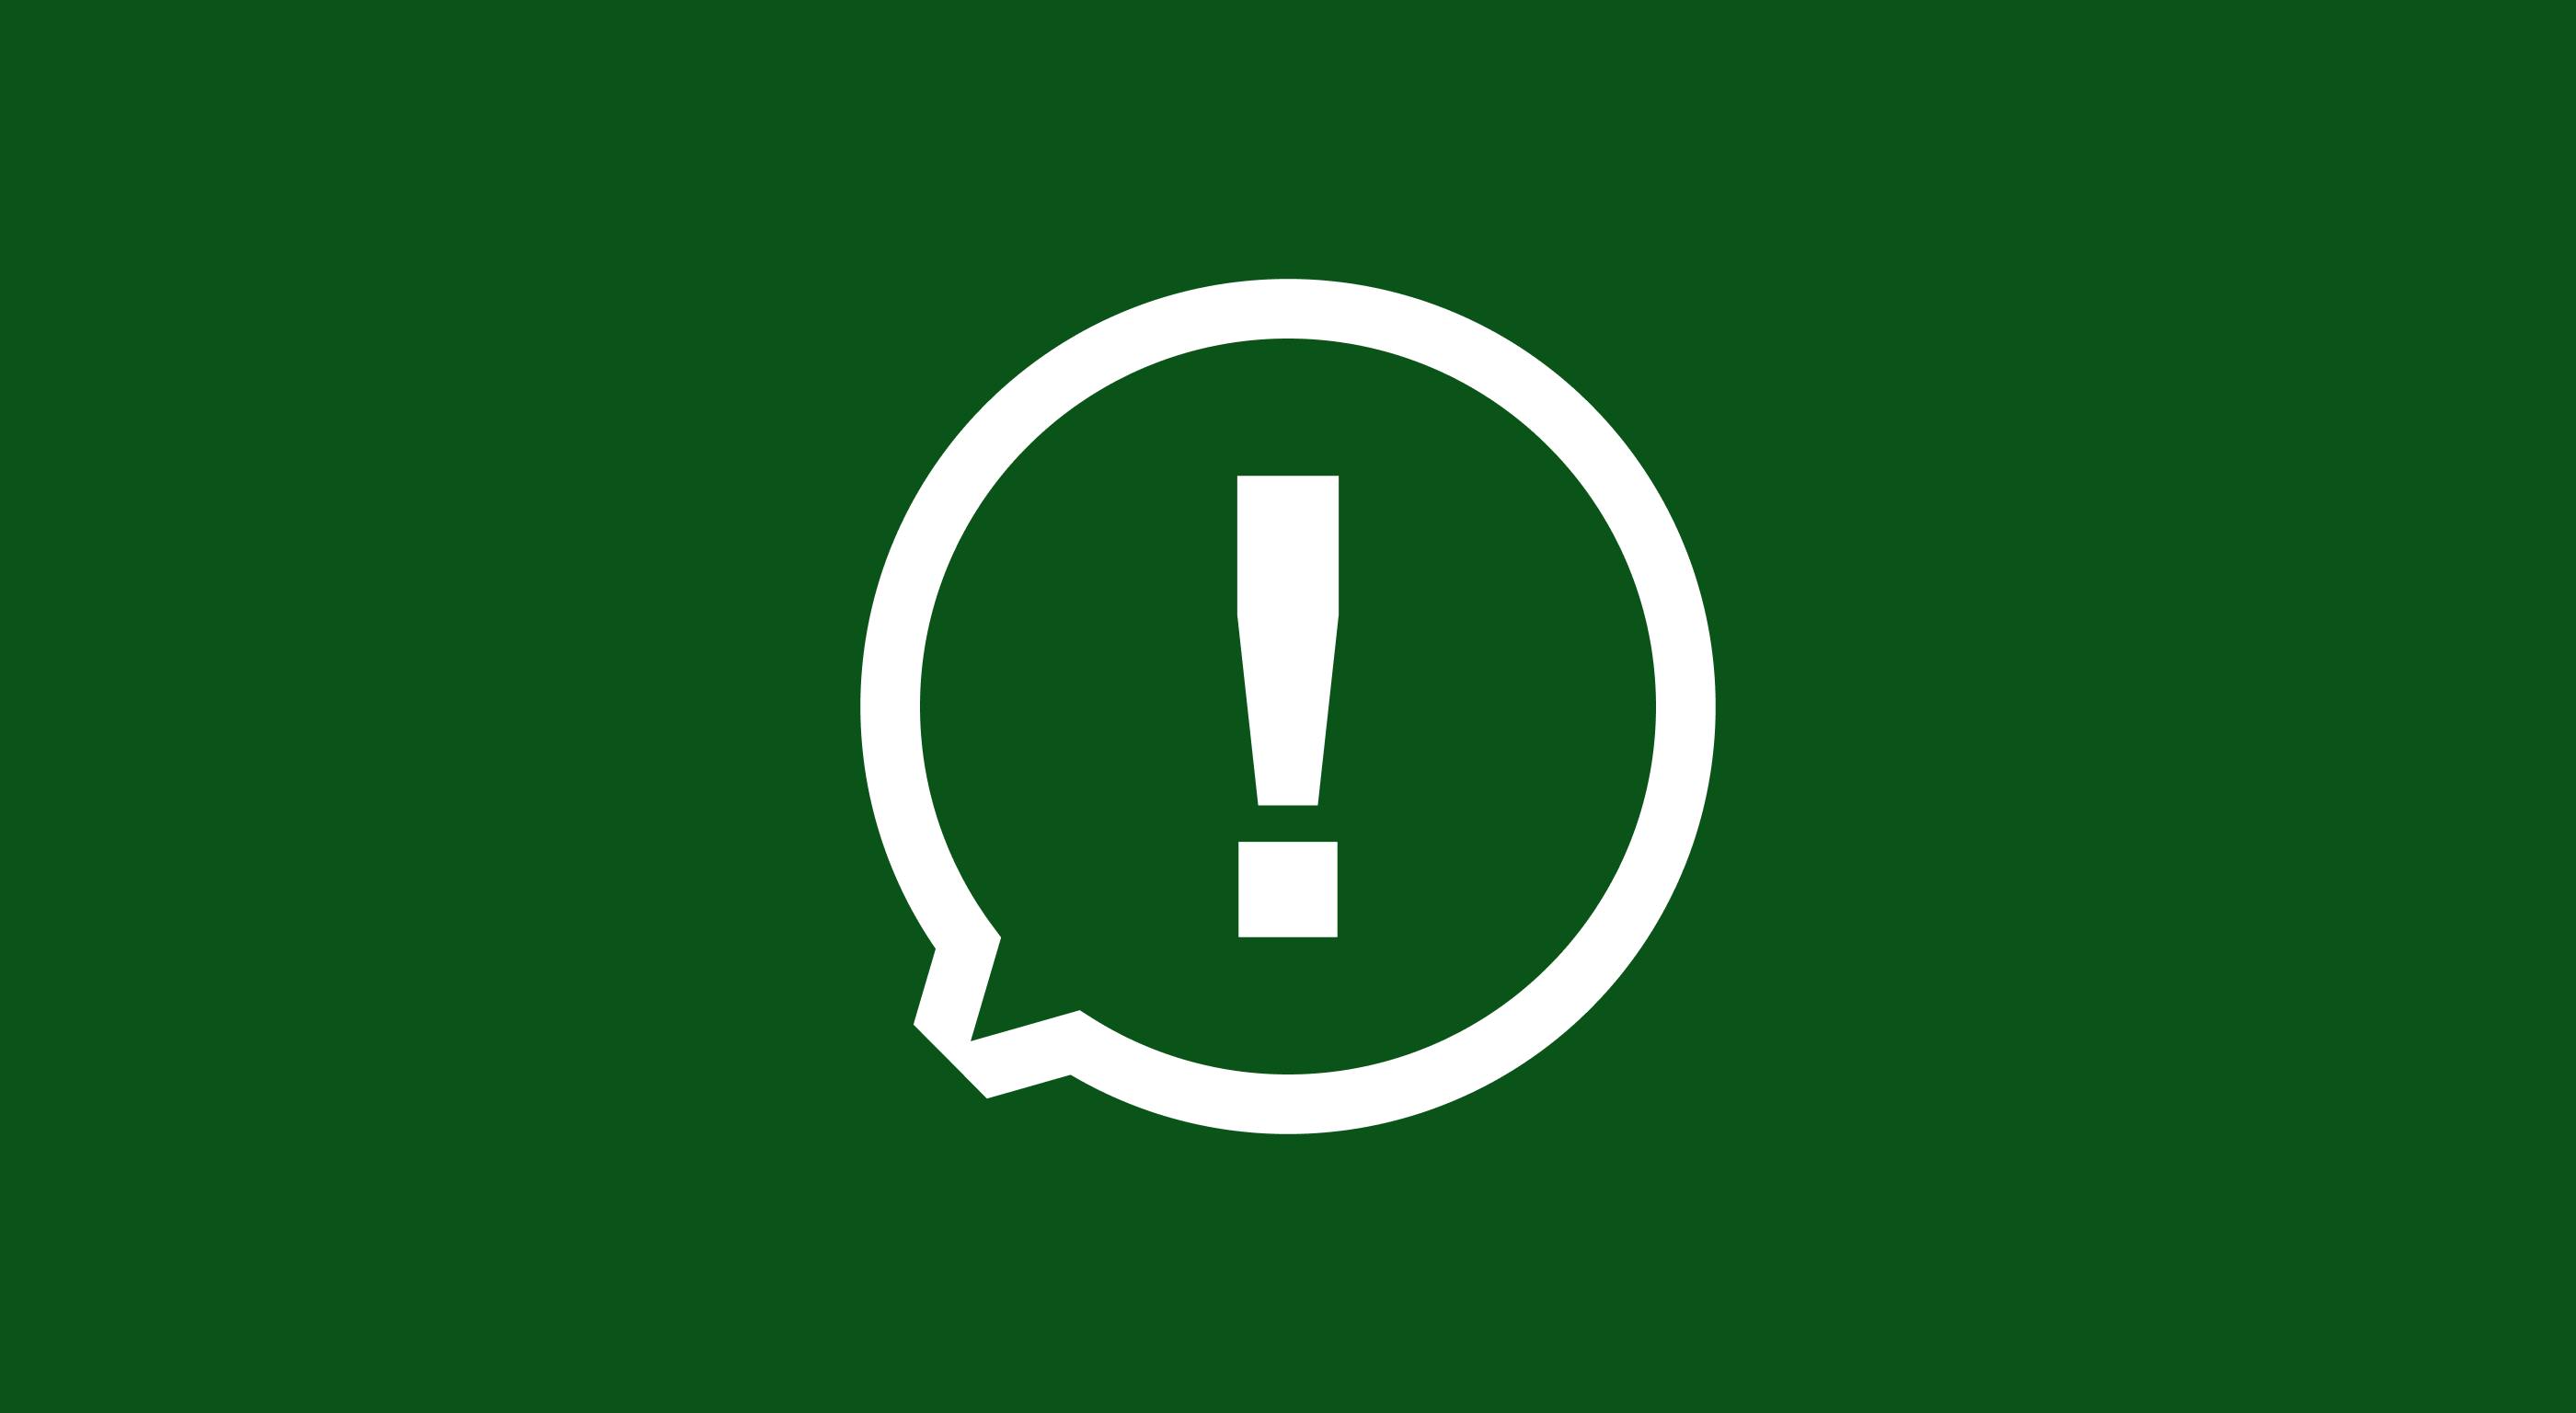 WhatsApp logo with exclamation mark